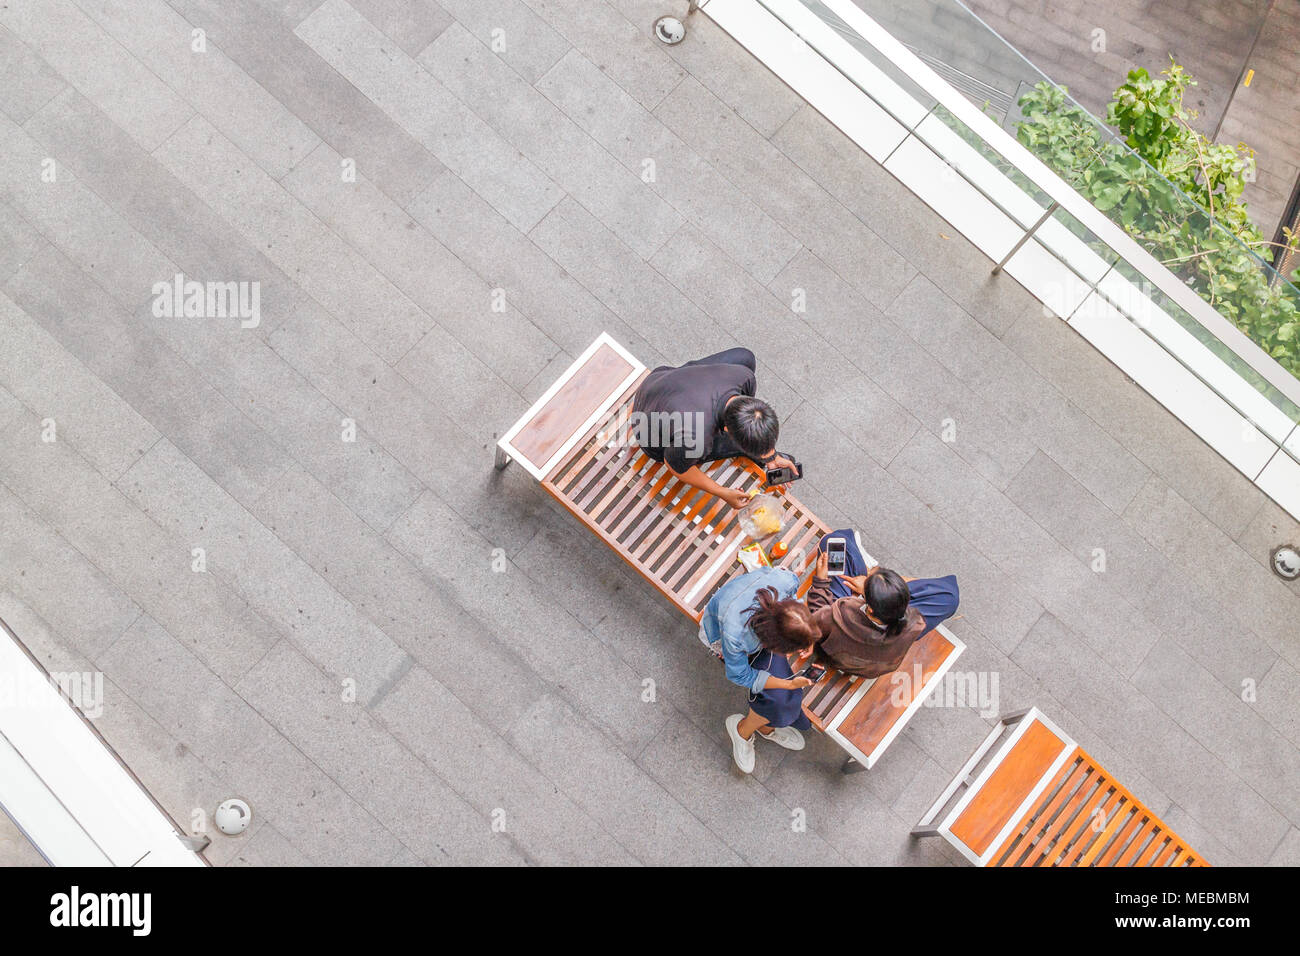 Overhead view of people sat on a bench using their mobile phones, Bangkok, Thailand Stock Photo